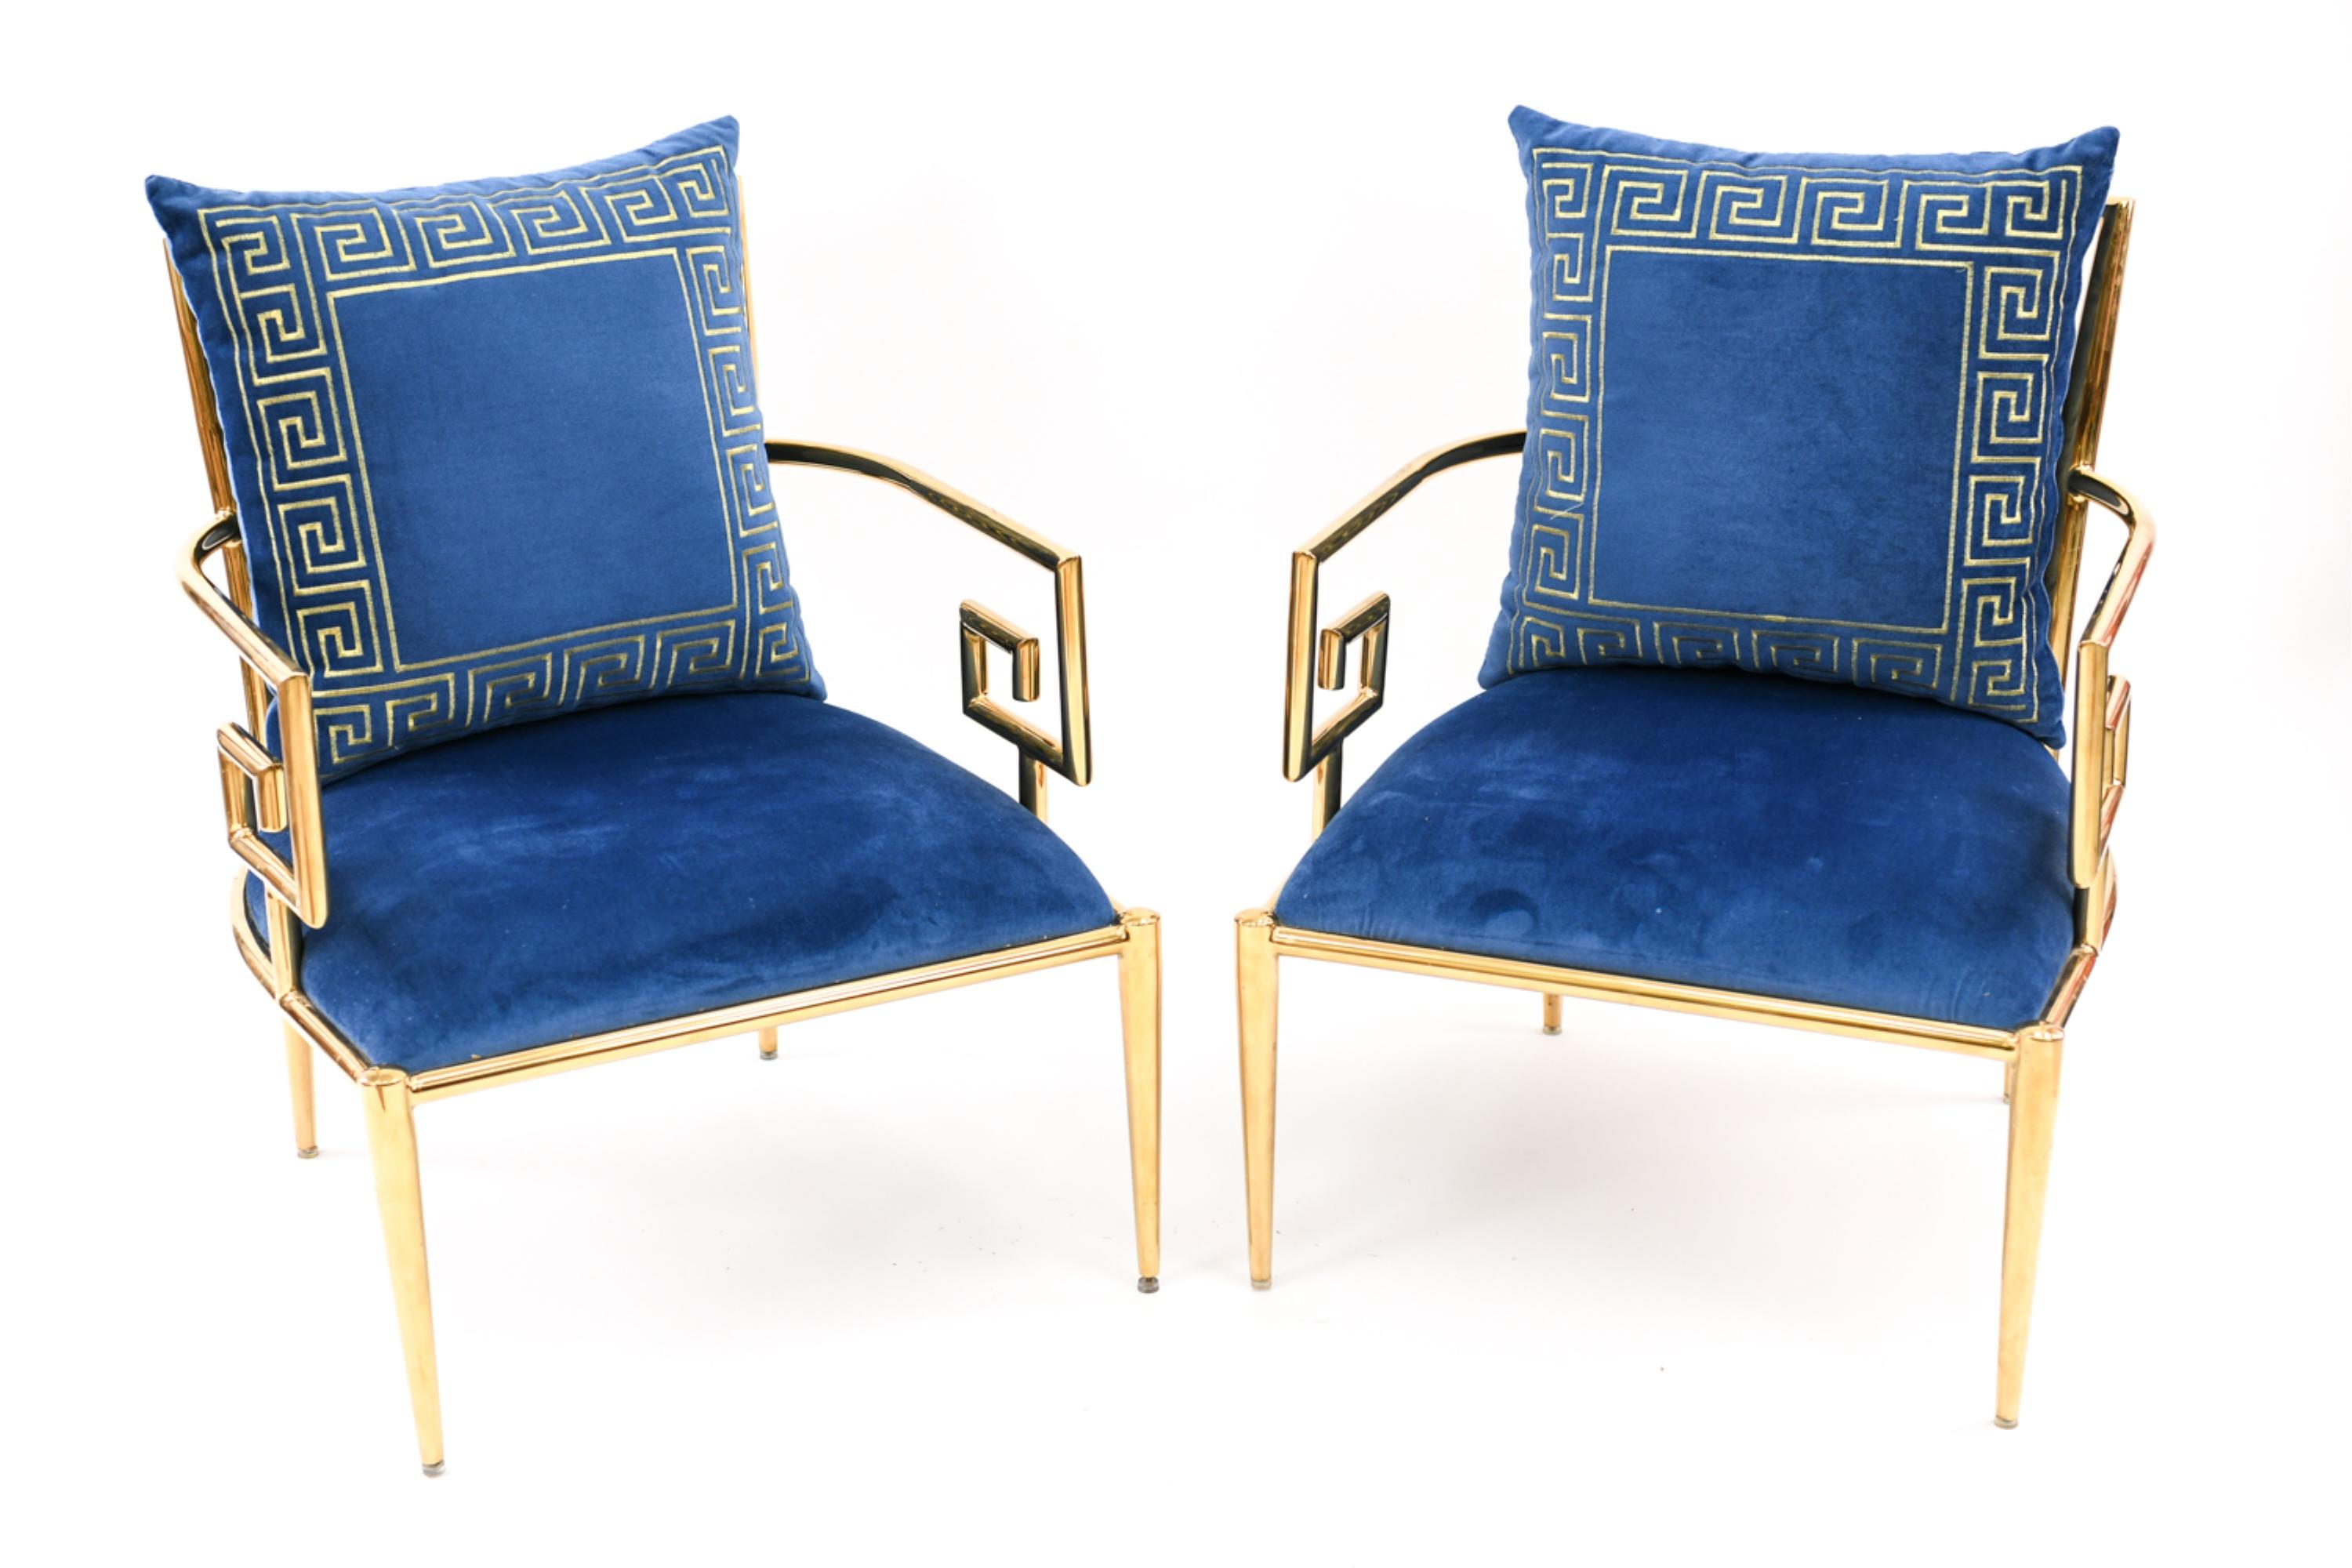 This exceptional pair of armchairs is presented with apparently original blue velvet twill upholstery, embroidered with metallic gold thread in a matching Greek key motif. Luxurious and comfortable, they are the epitome of Hollywood Regency-style